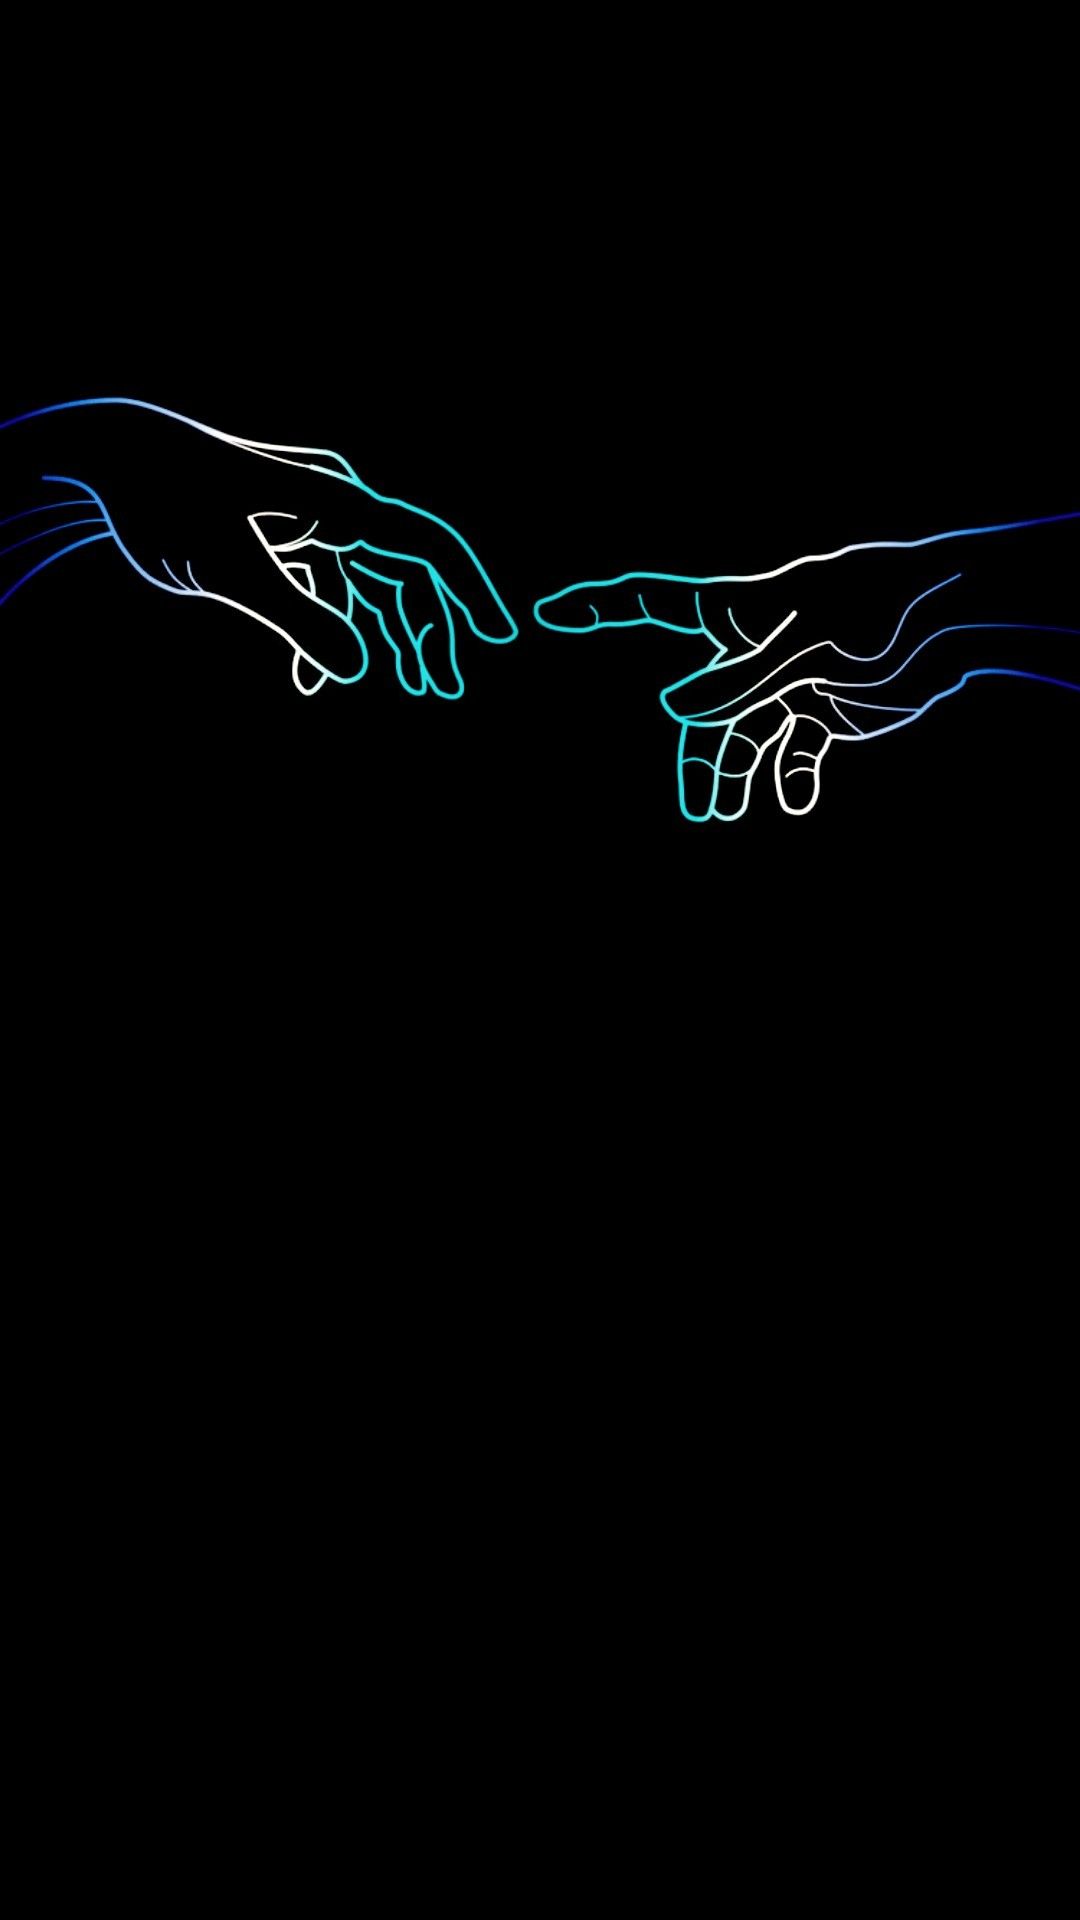 Two hands in blue and white reaching out to each other on a black background - LGBT